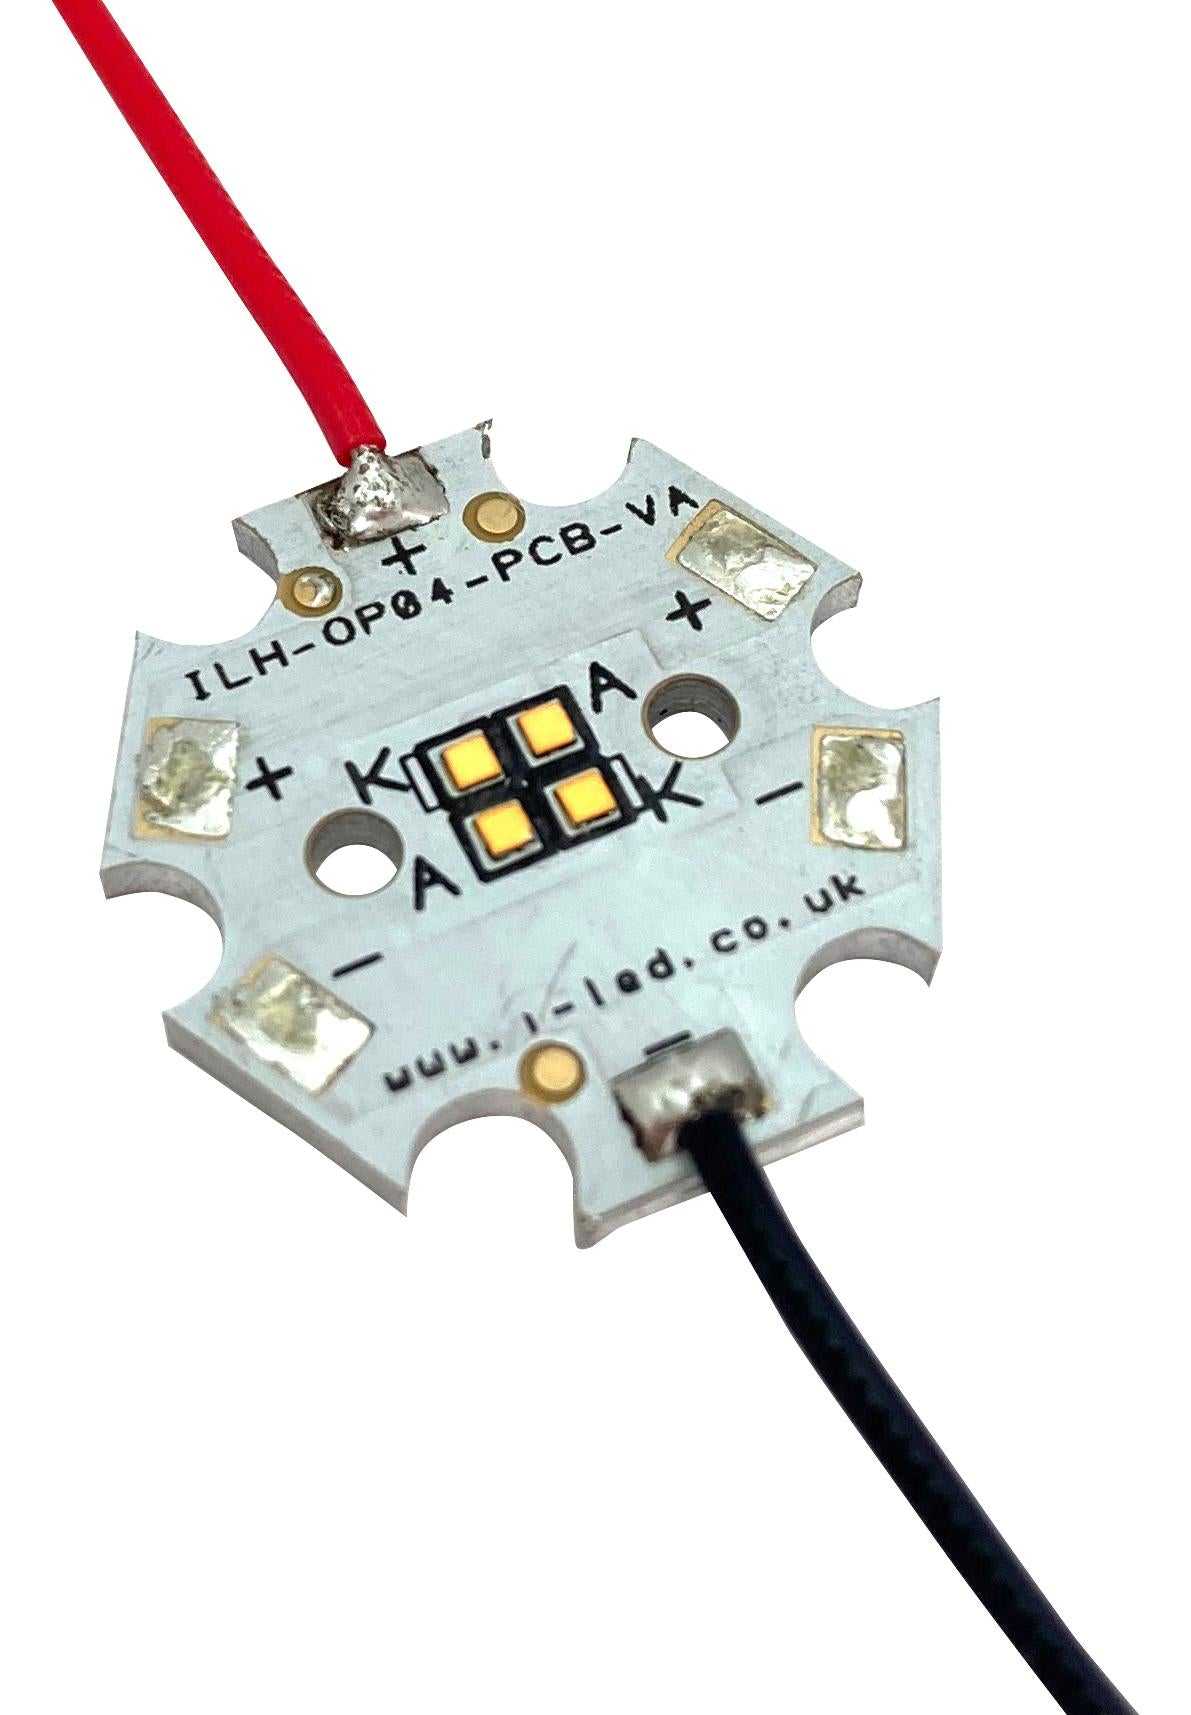 ILH-OP04-TRGR-SC221-WIR200. LED MODULE, GREEN, 856LM, 525NM, STAR INTELLIGENT LED SOLUTIONS